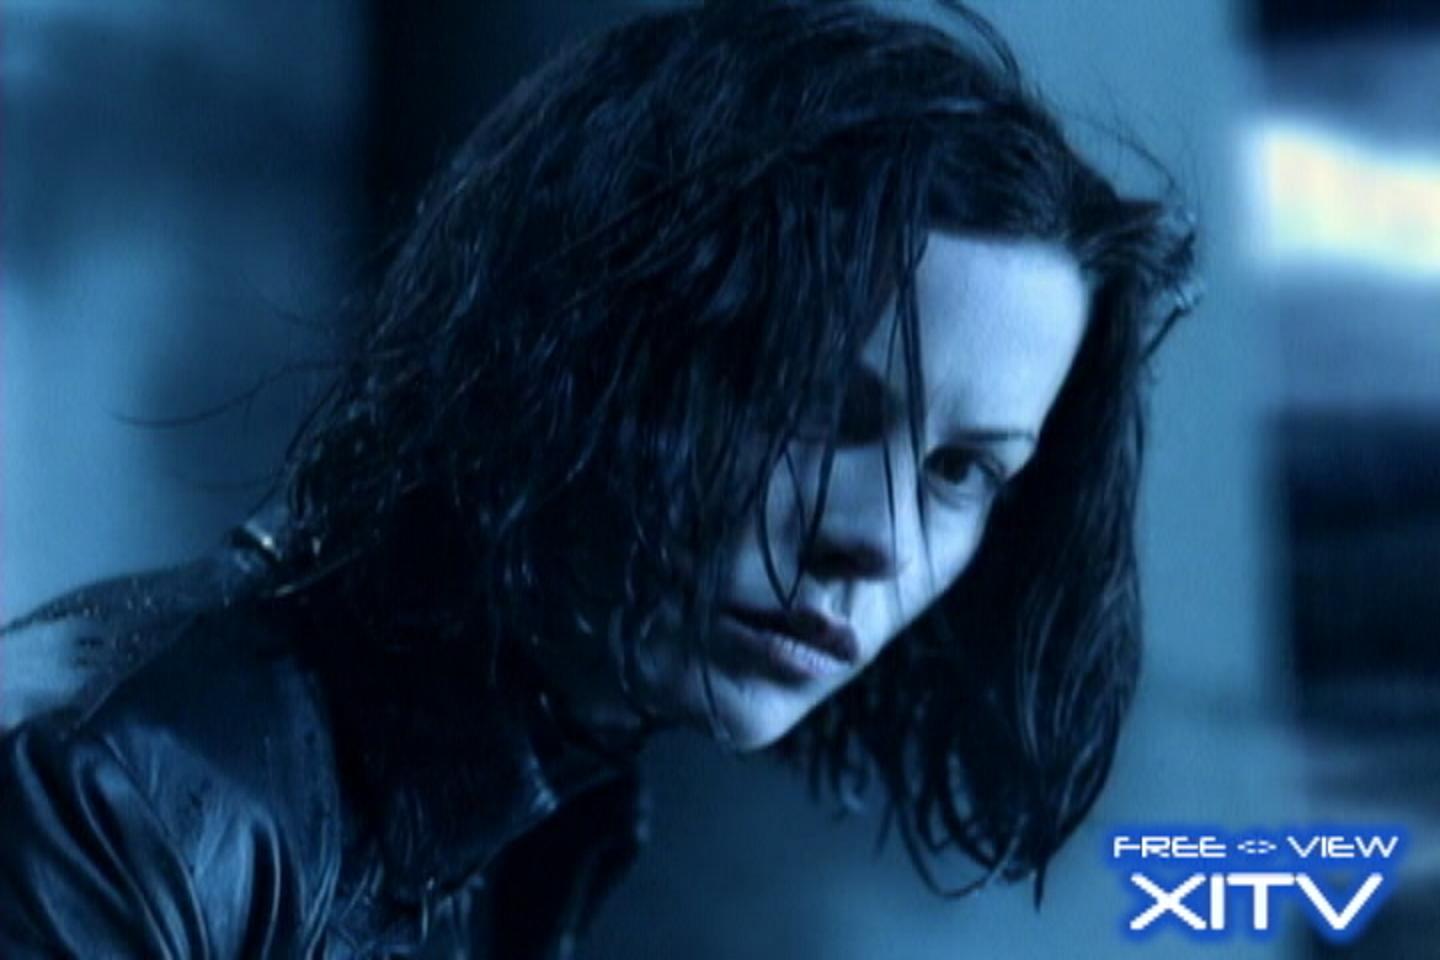 XITV FREE <> VIEW  "UNDERWORLD" Starring Kate Beckinsale! XITV Is Must See TV!